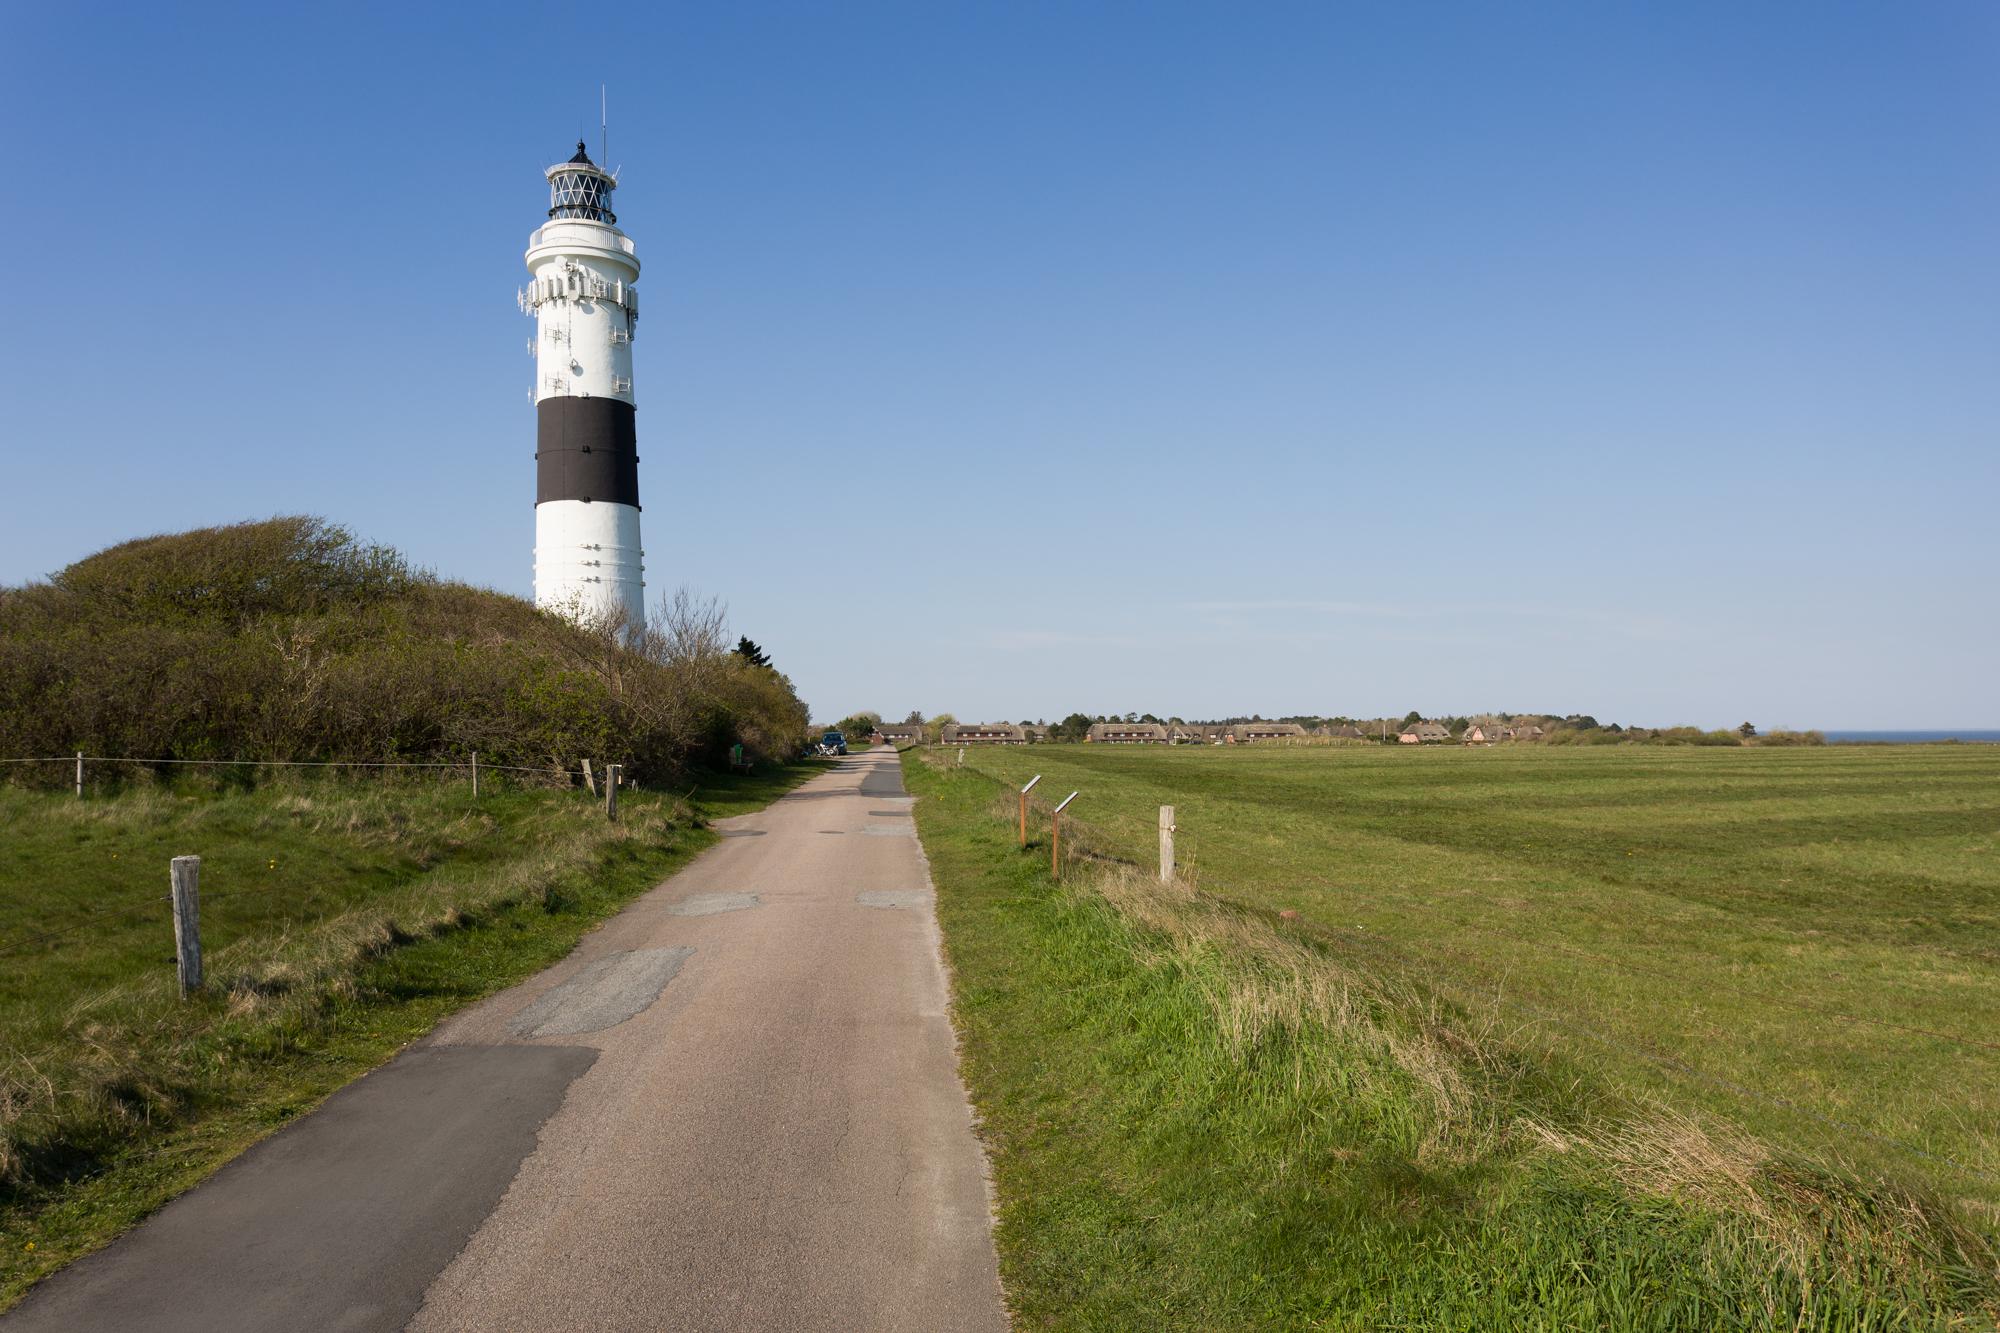 The lighthouse nicknamed "Langer Christian" is easily accessible via road and features a black and white colour.